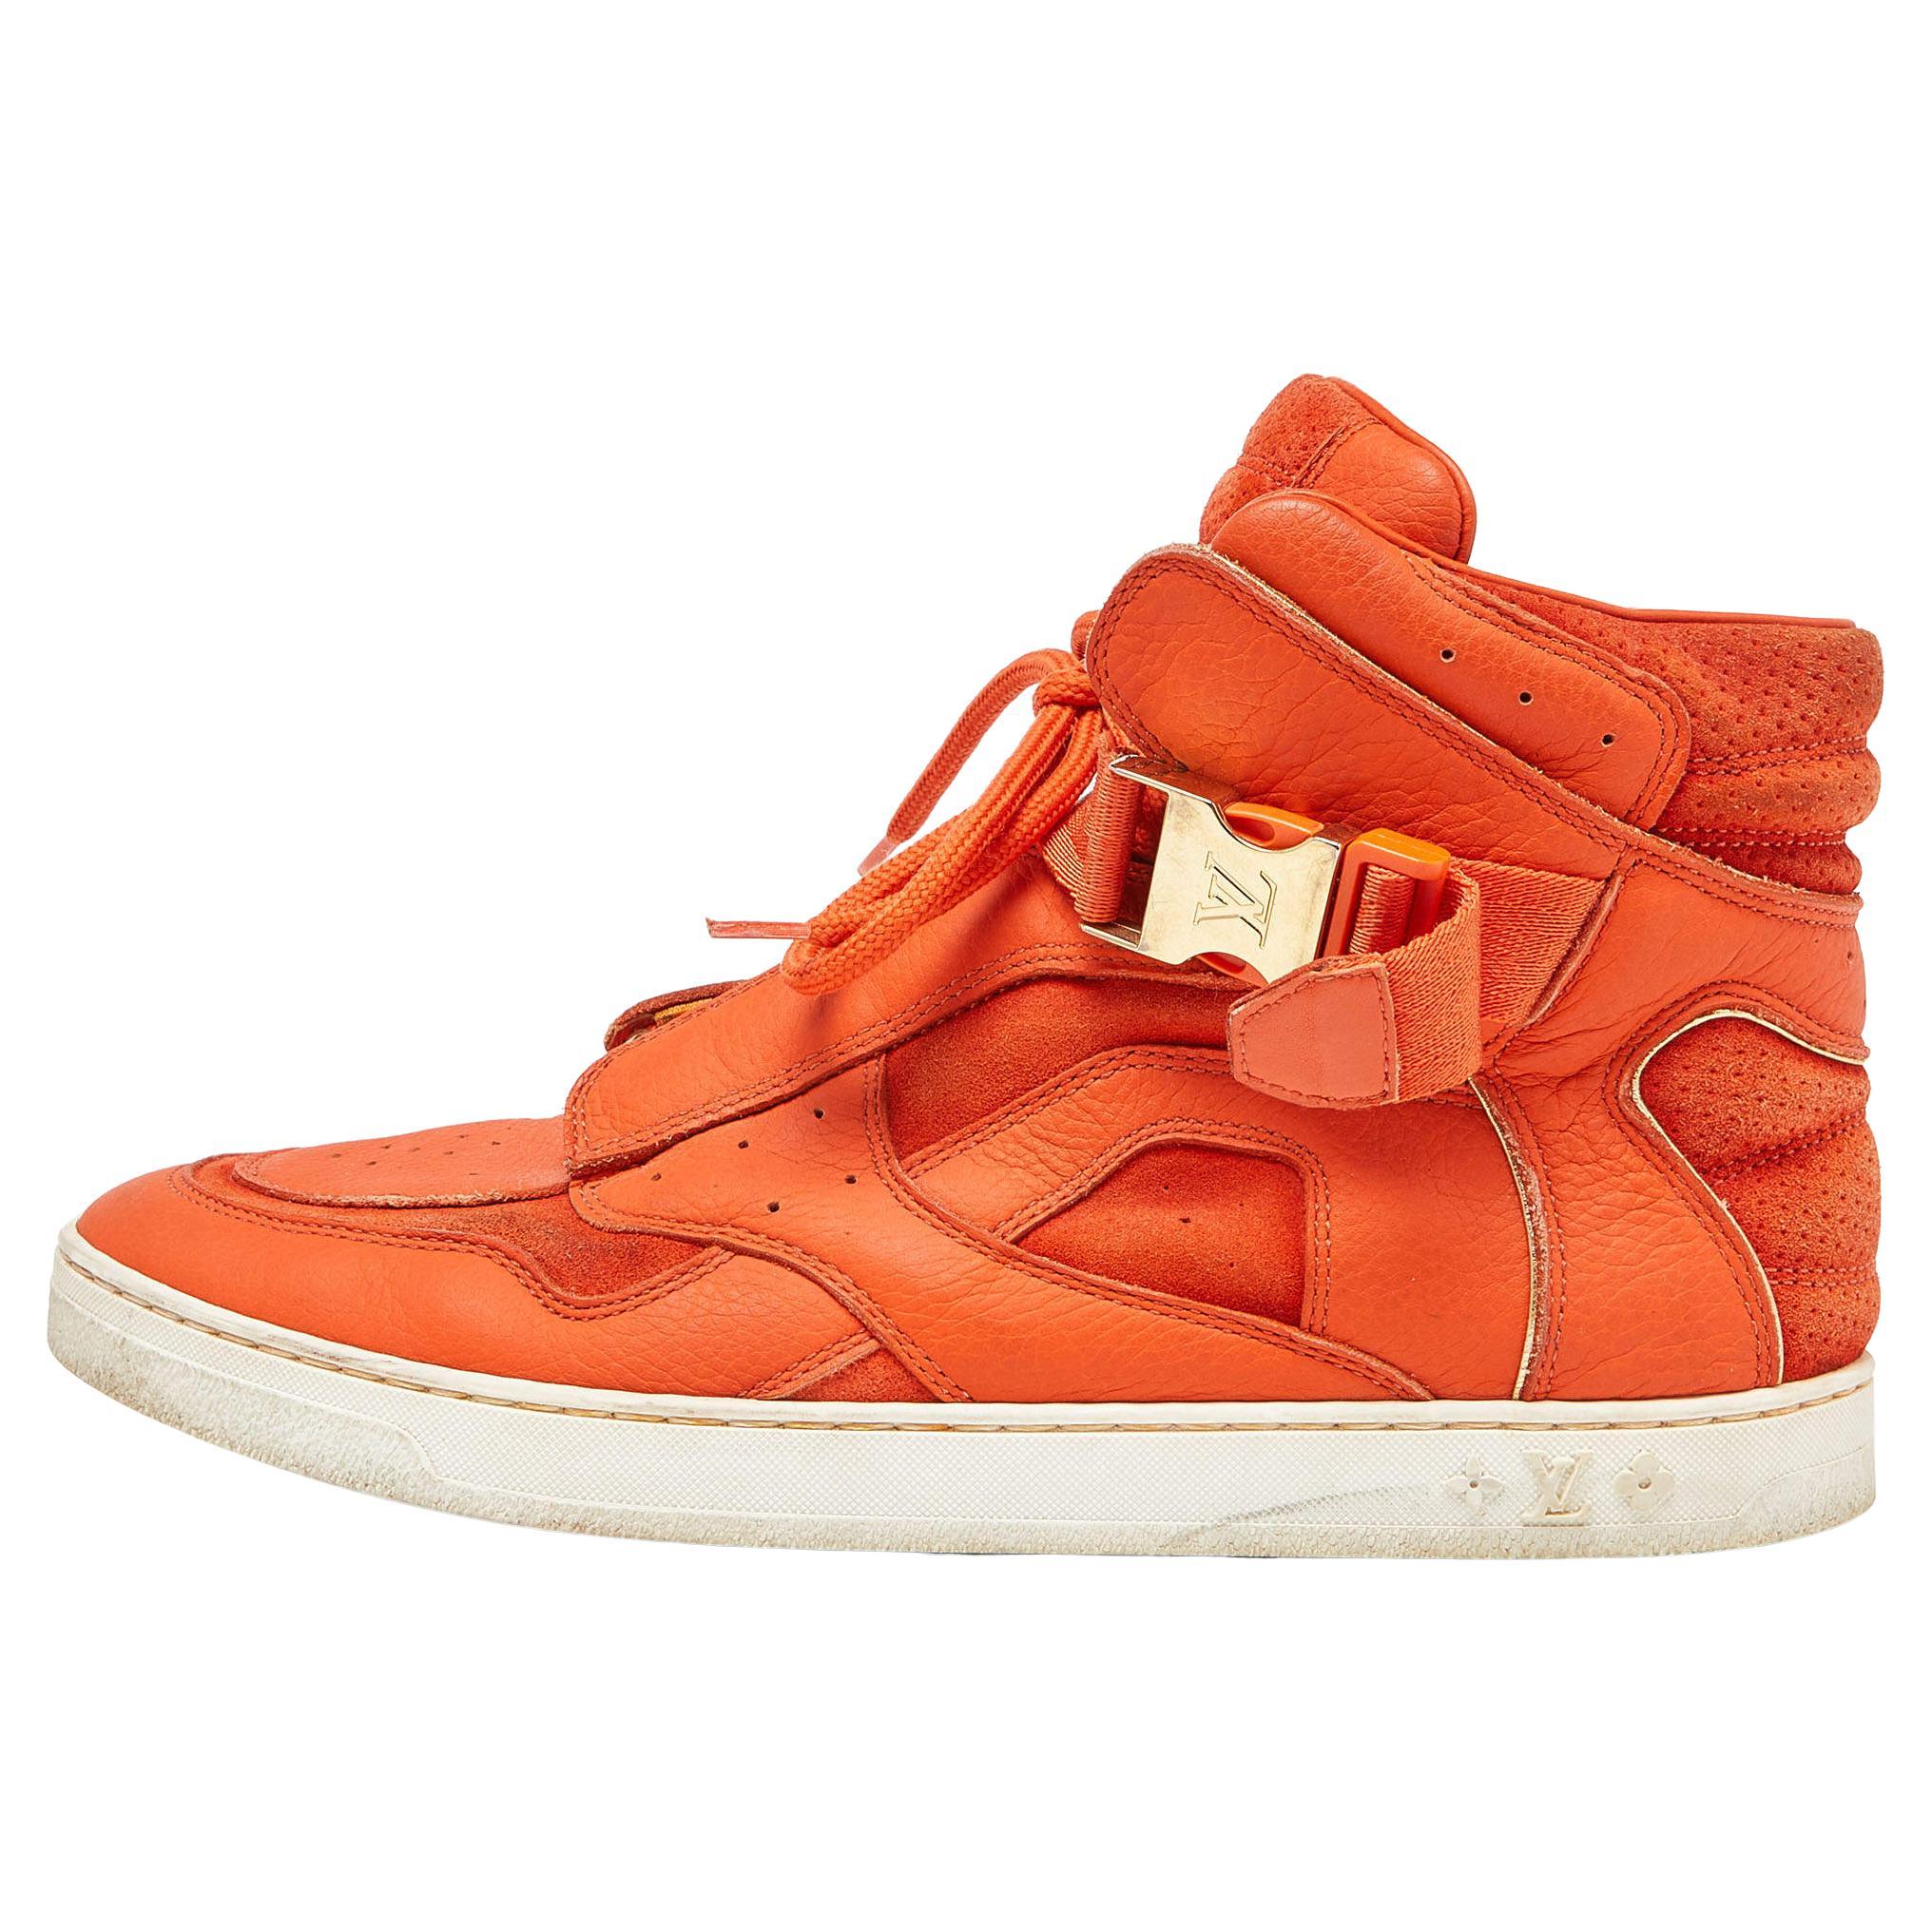 Louis Vuitton Orange Leather and Suede Slipstream High Top Sneakers Size 36 For Sale